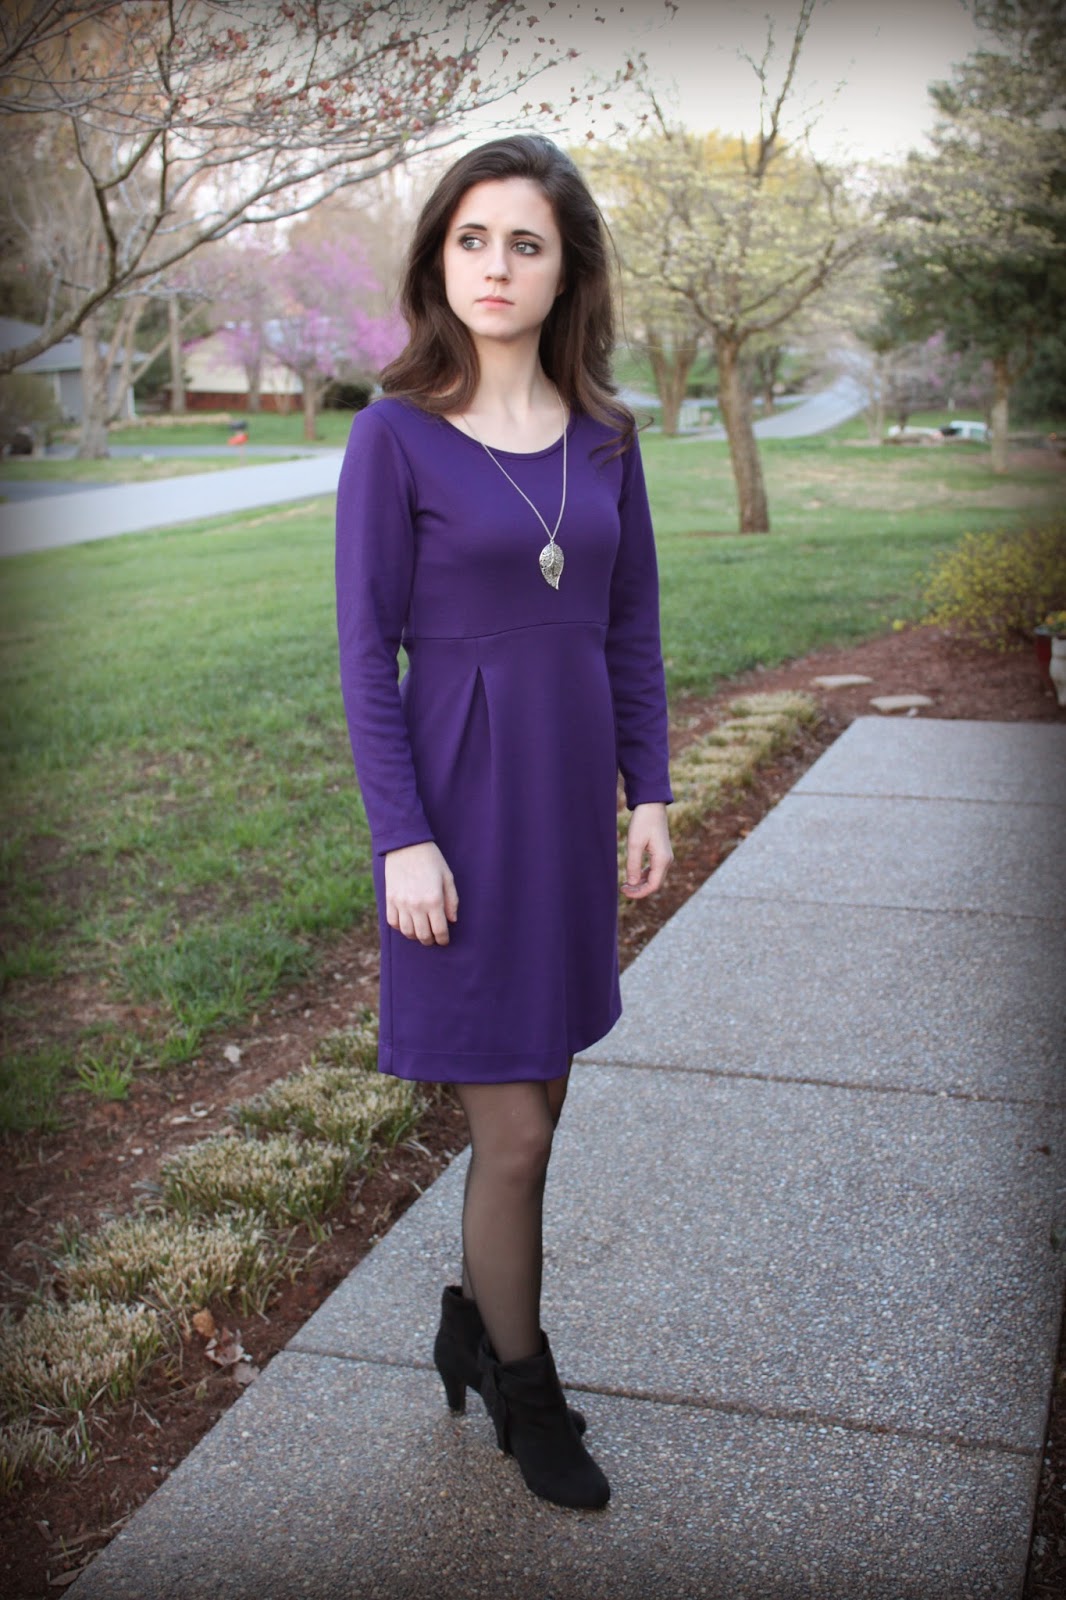 JanMade: Winter Street Dress from Patternreview